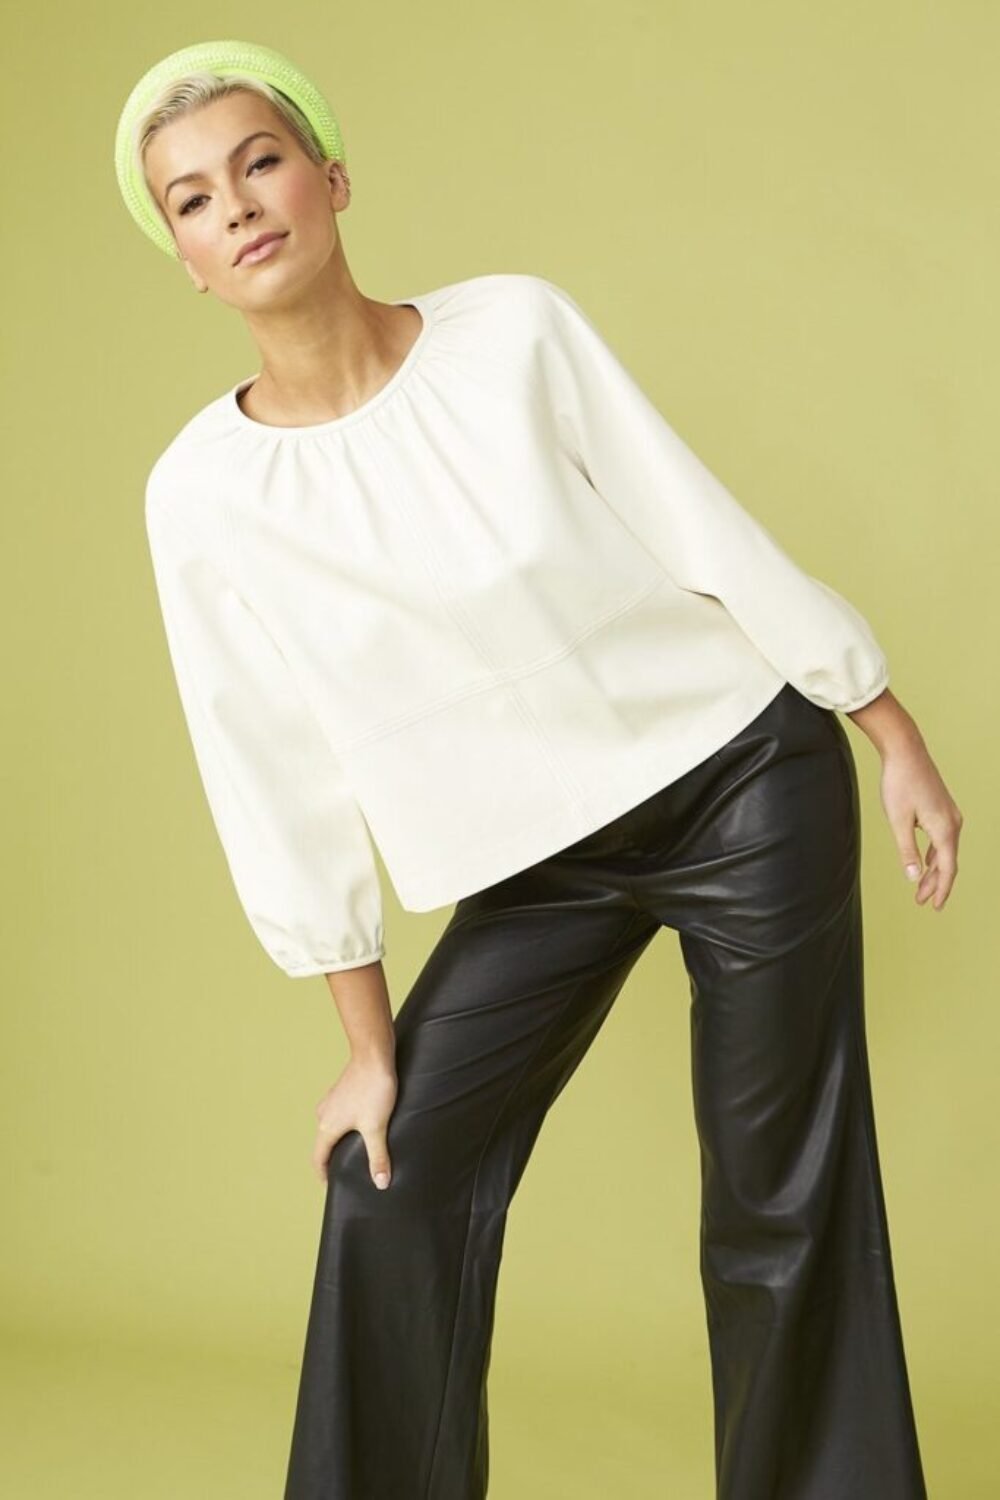 Shop Lux White Eco Leather Swing Top and women's luxury and designer clothes at www.lux-apparel.co.uk